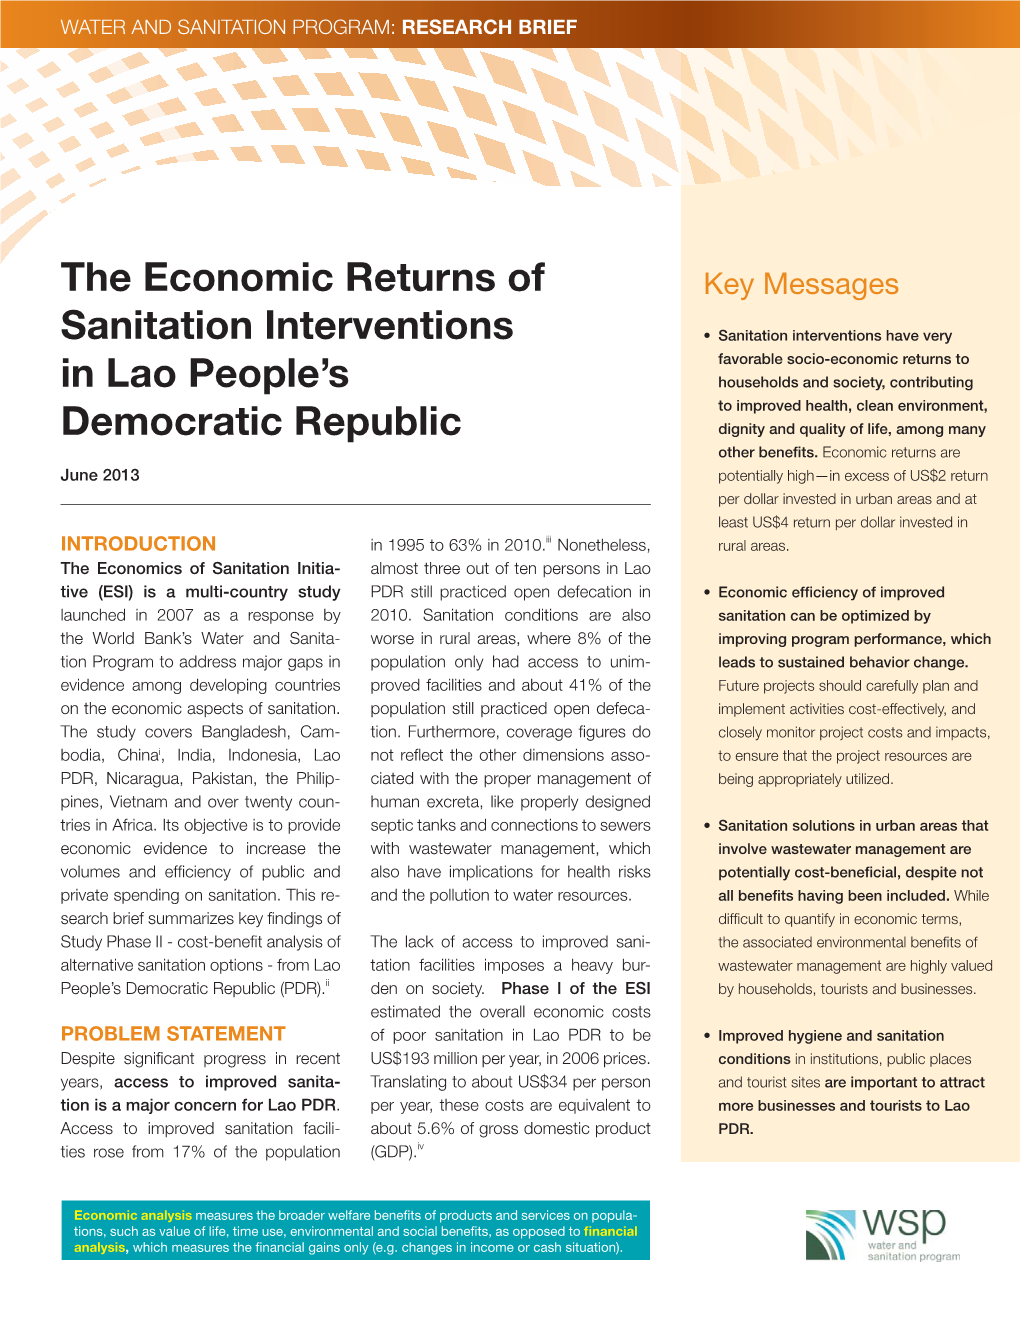 The Economic Returns of Sanitation Interventions in Lao People's